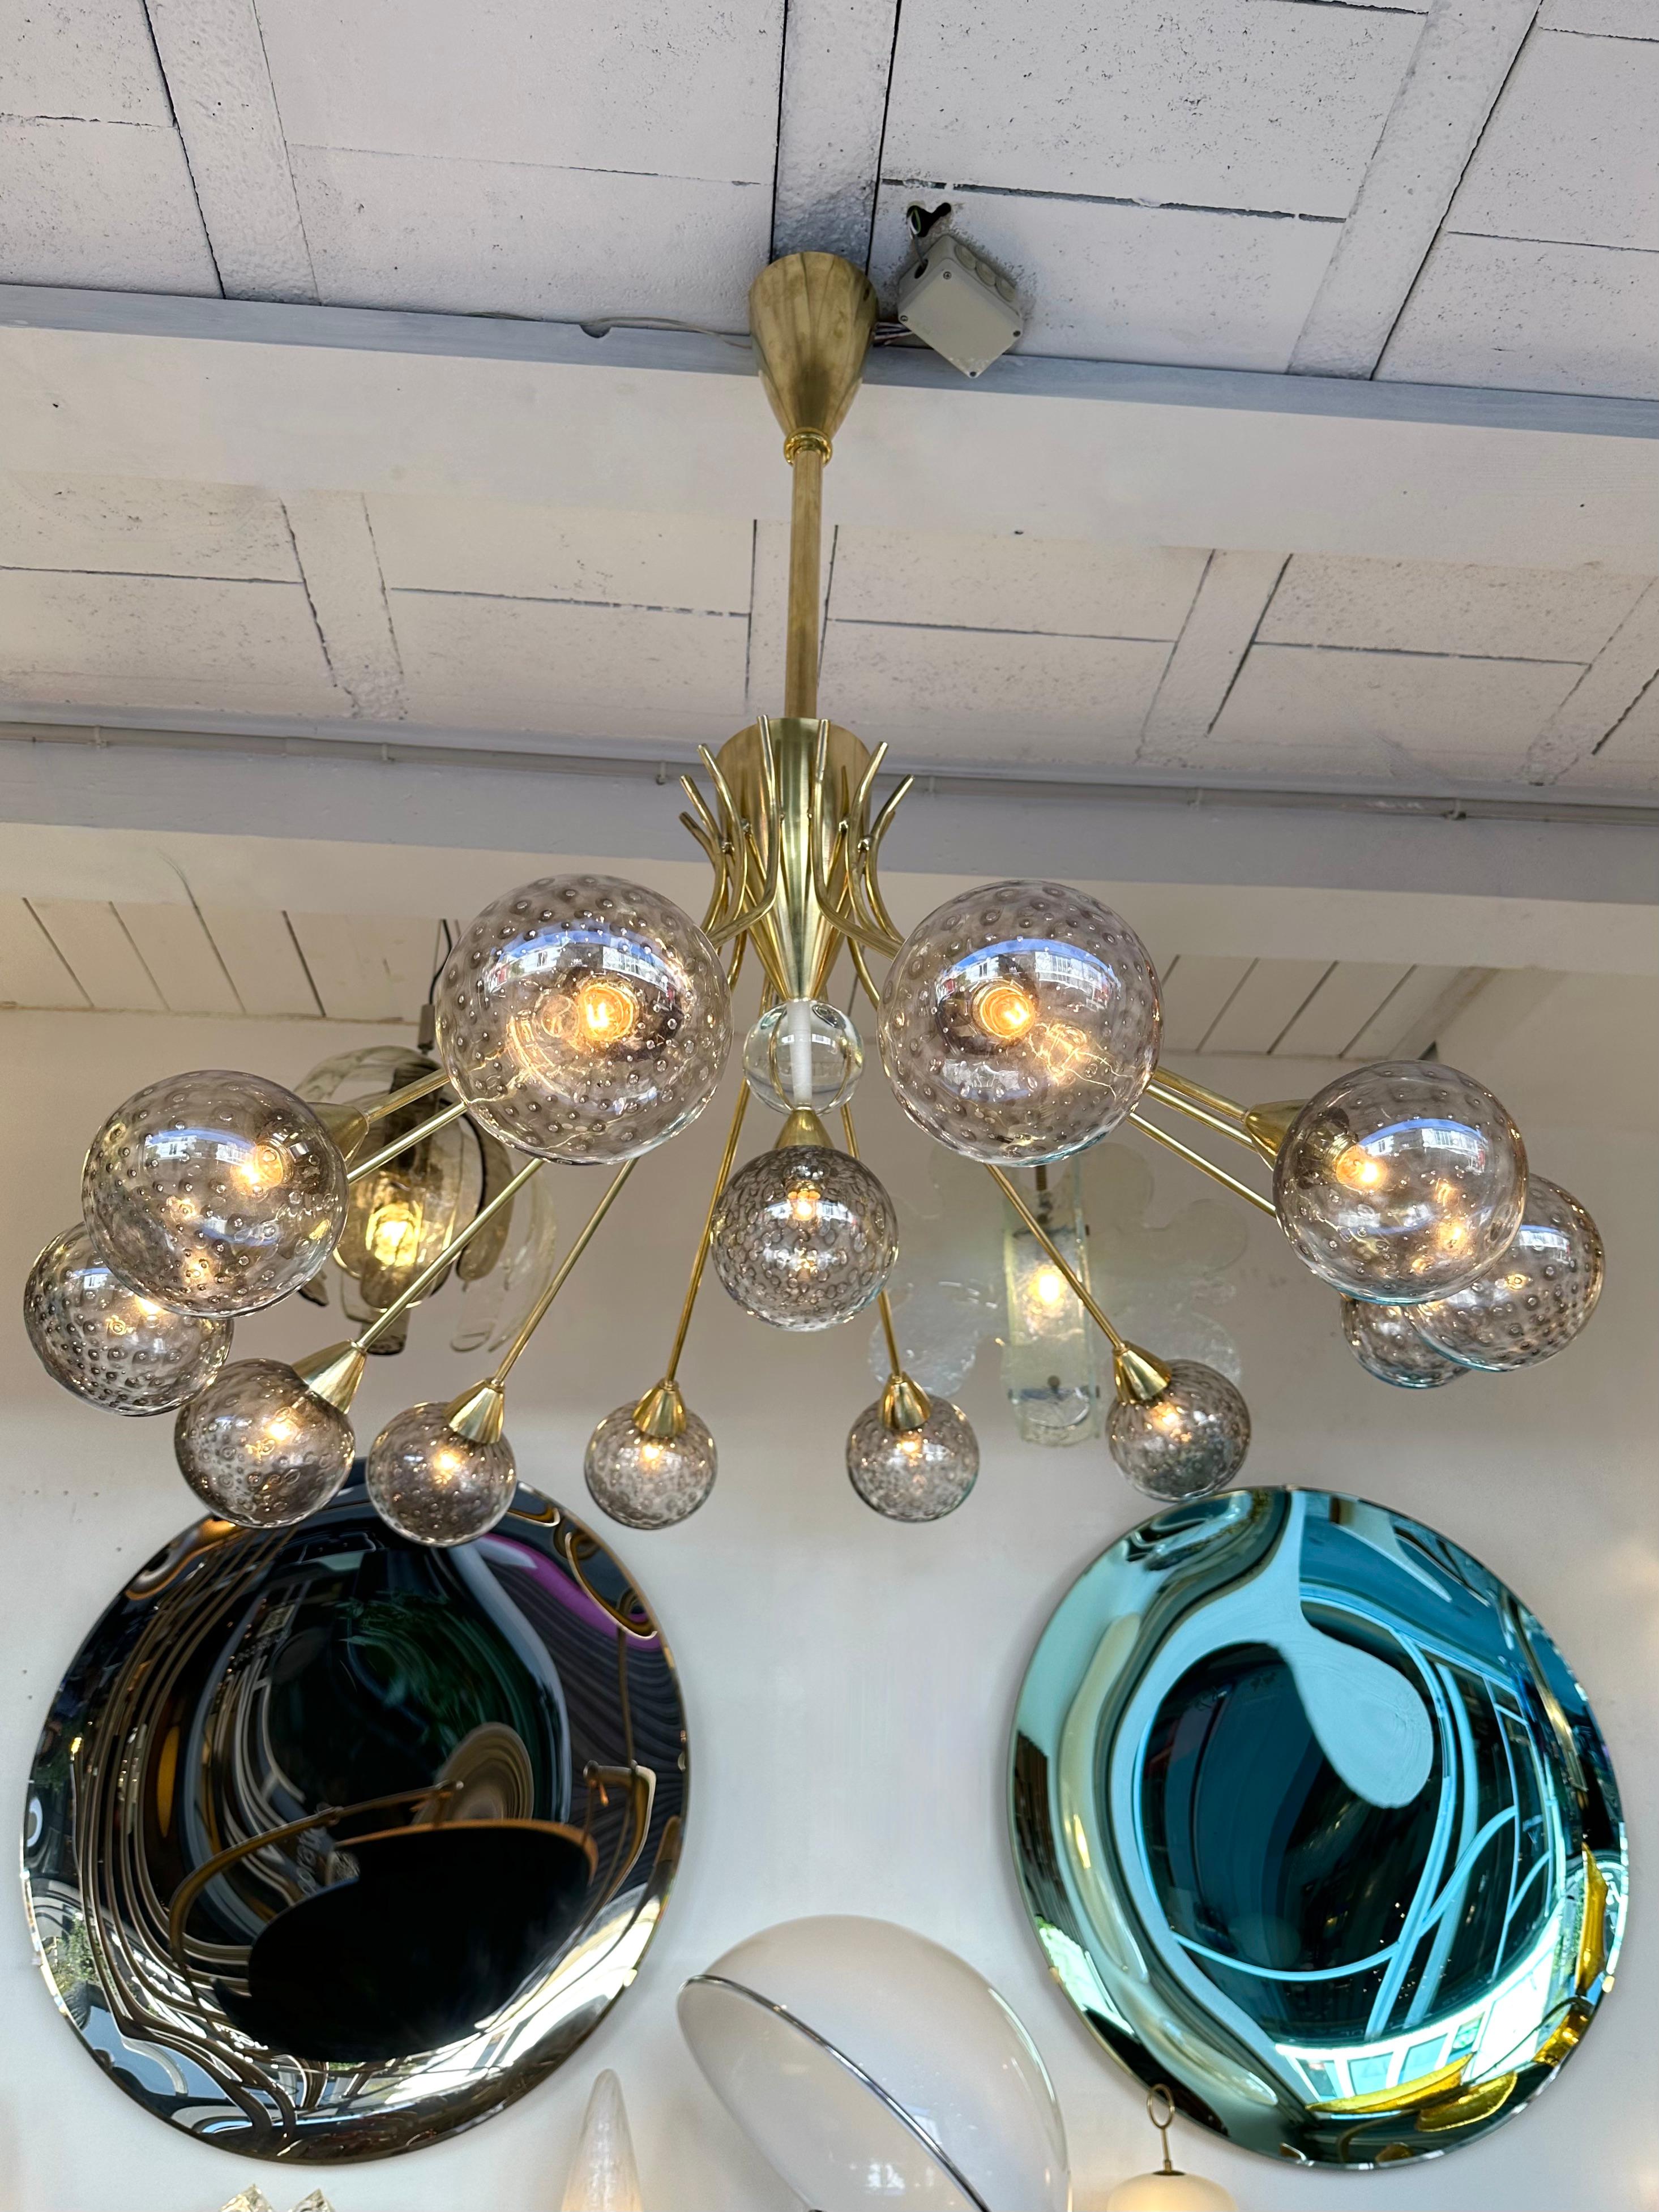 Large brass chandelier ceiling pendant light lamp with grey bubble Murano glass ball globe. Made with old stock of glass from Barovier and Toso from the end of 1960s beginning 1970s. Contemporary work from a small italian artisanal workshop. In the